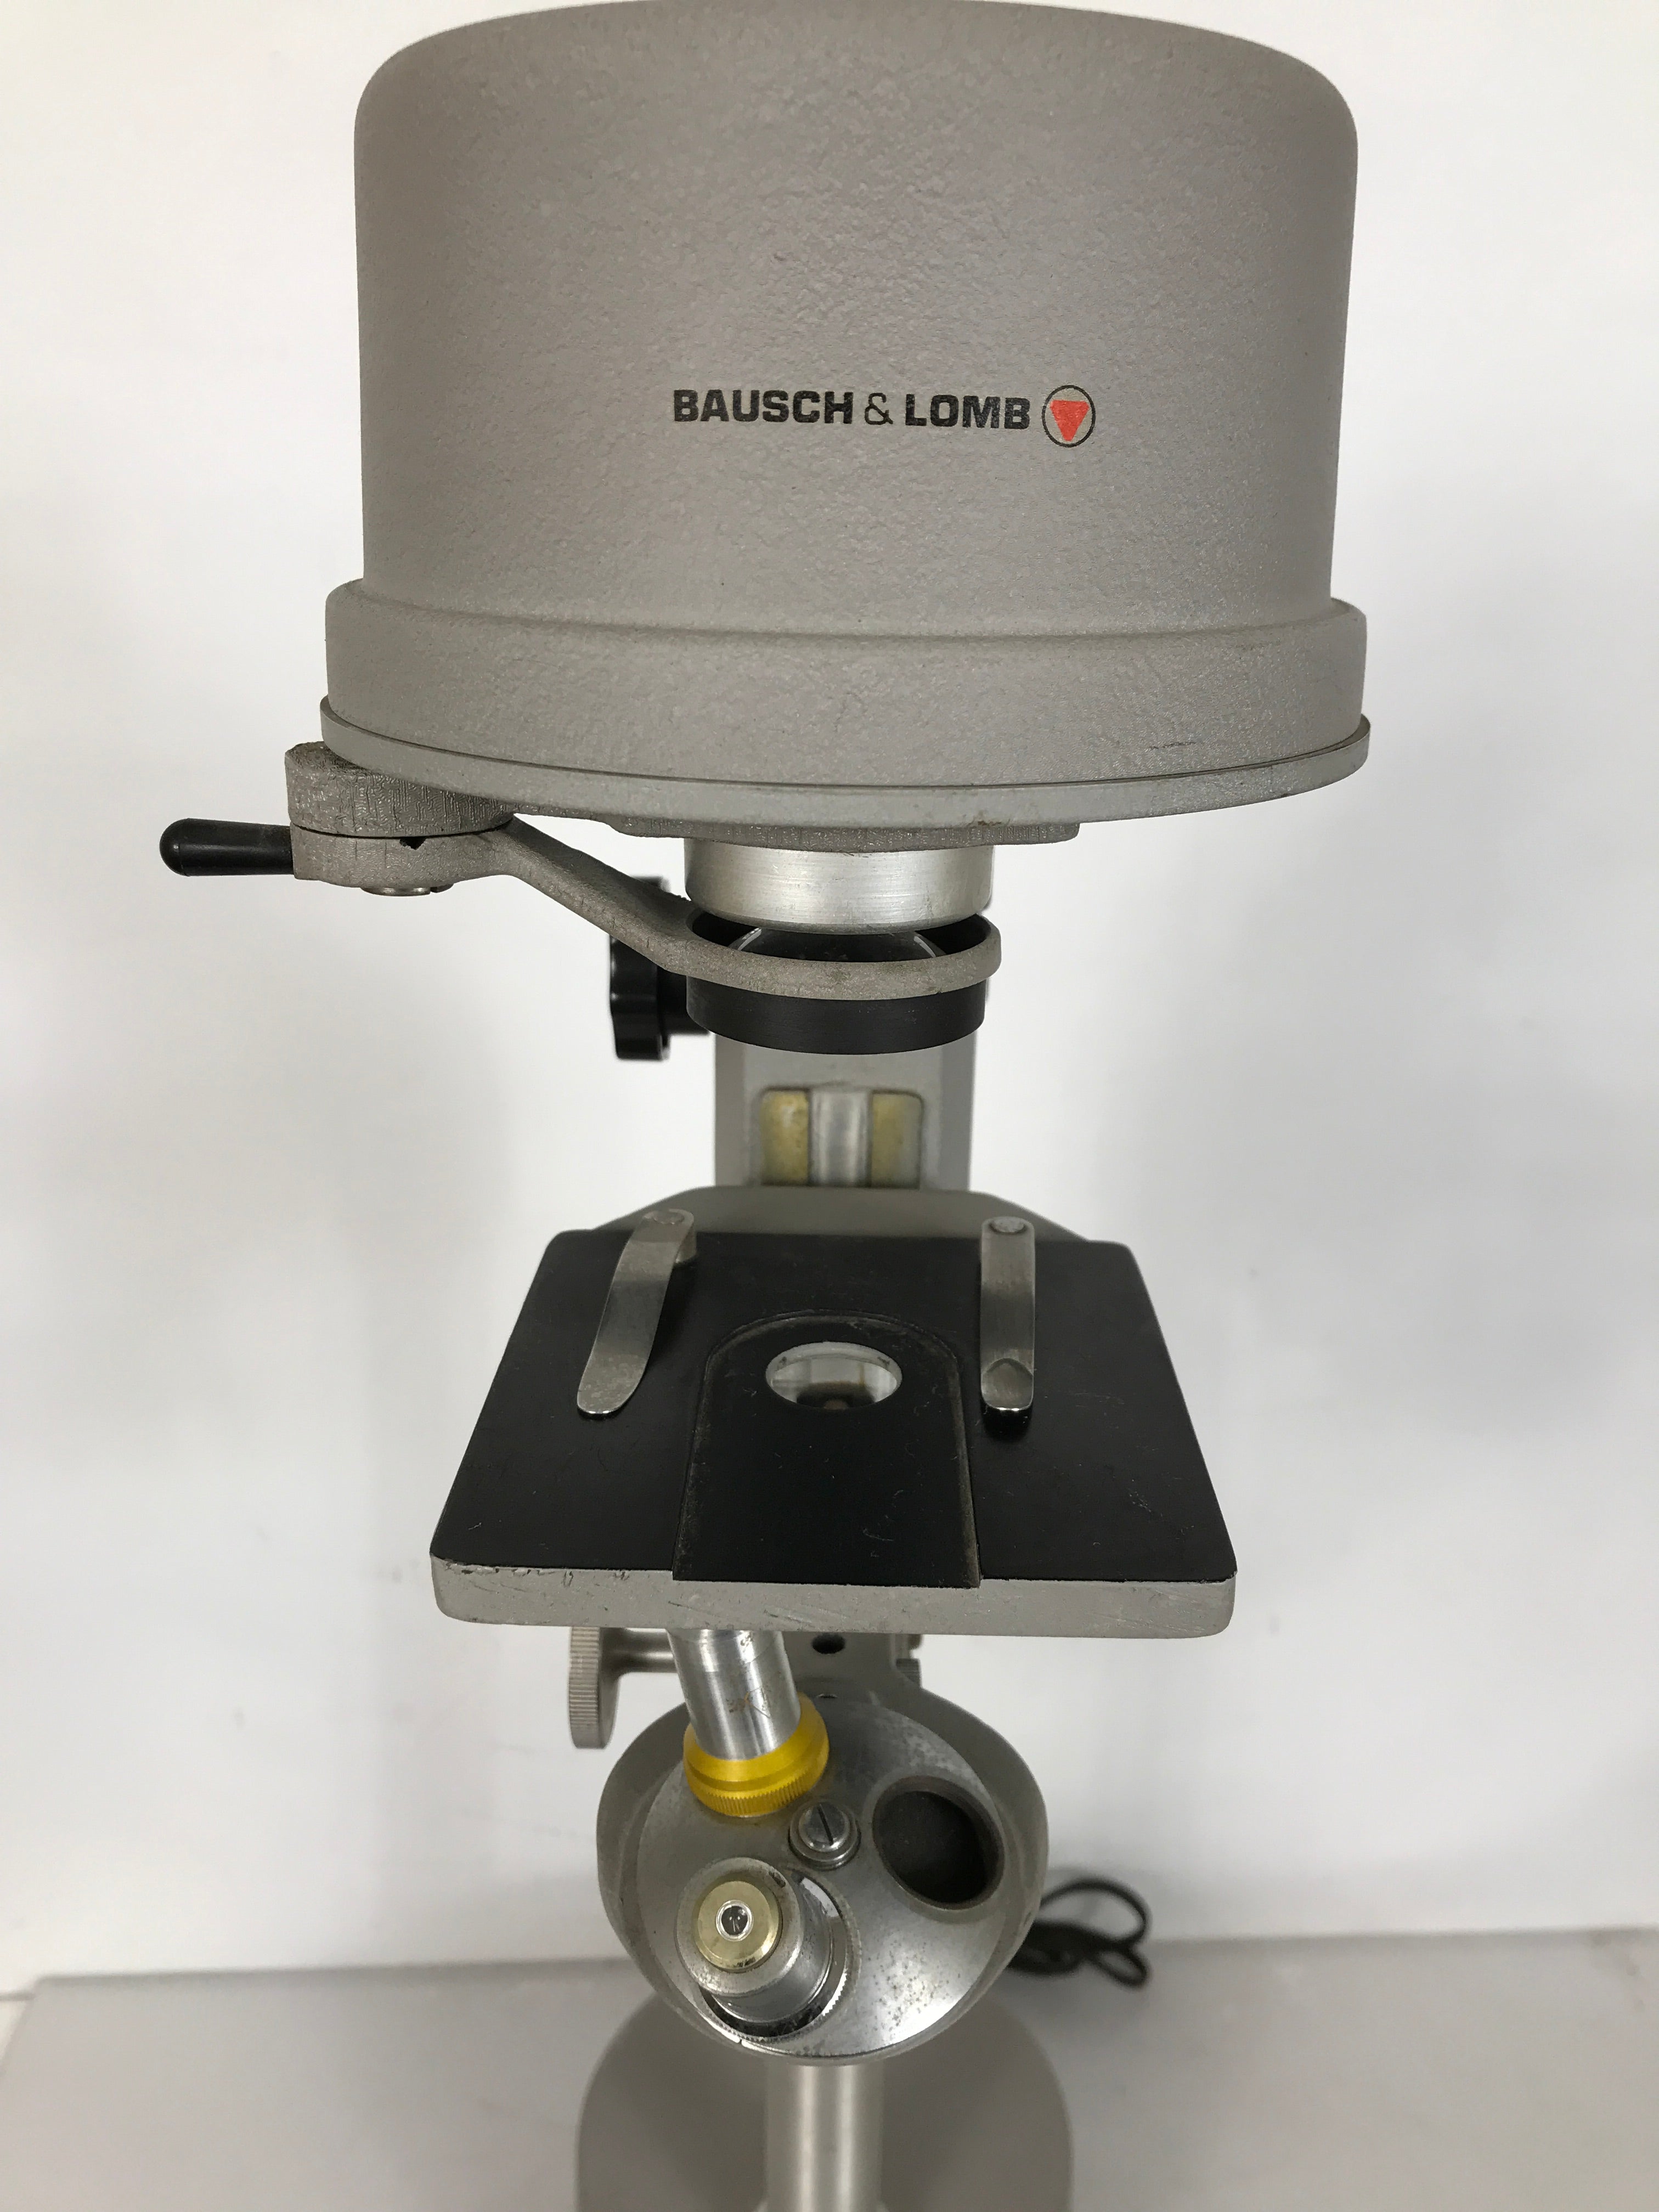 Bausch & Lomb Micro Projector Microscope 42-63-59 *For Parts or Repair* #2